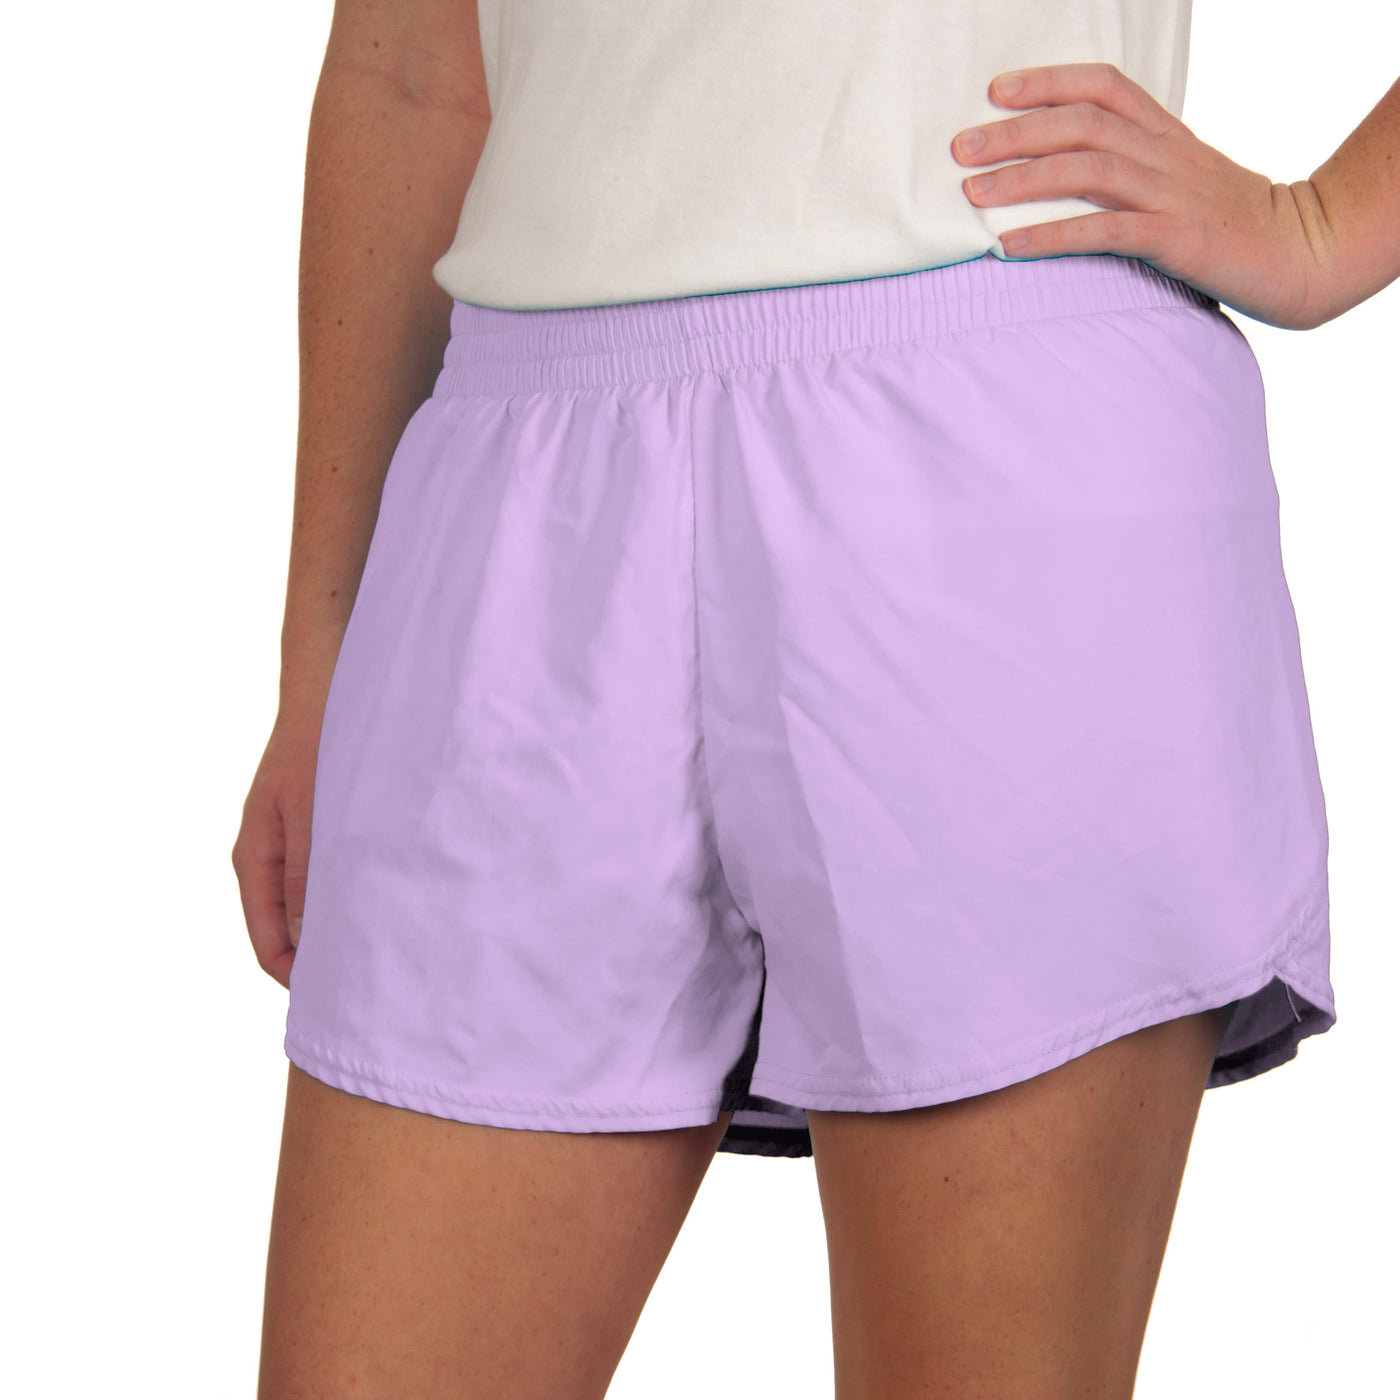 Steph Shorts in Solid Lavender